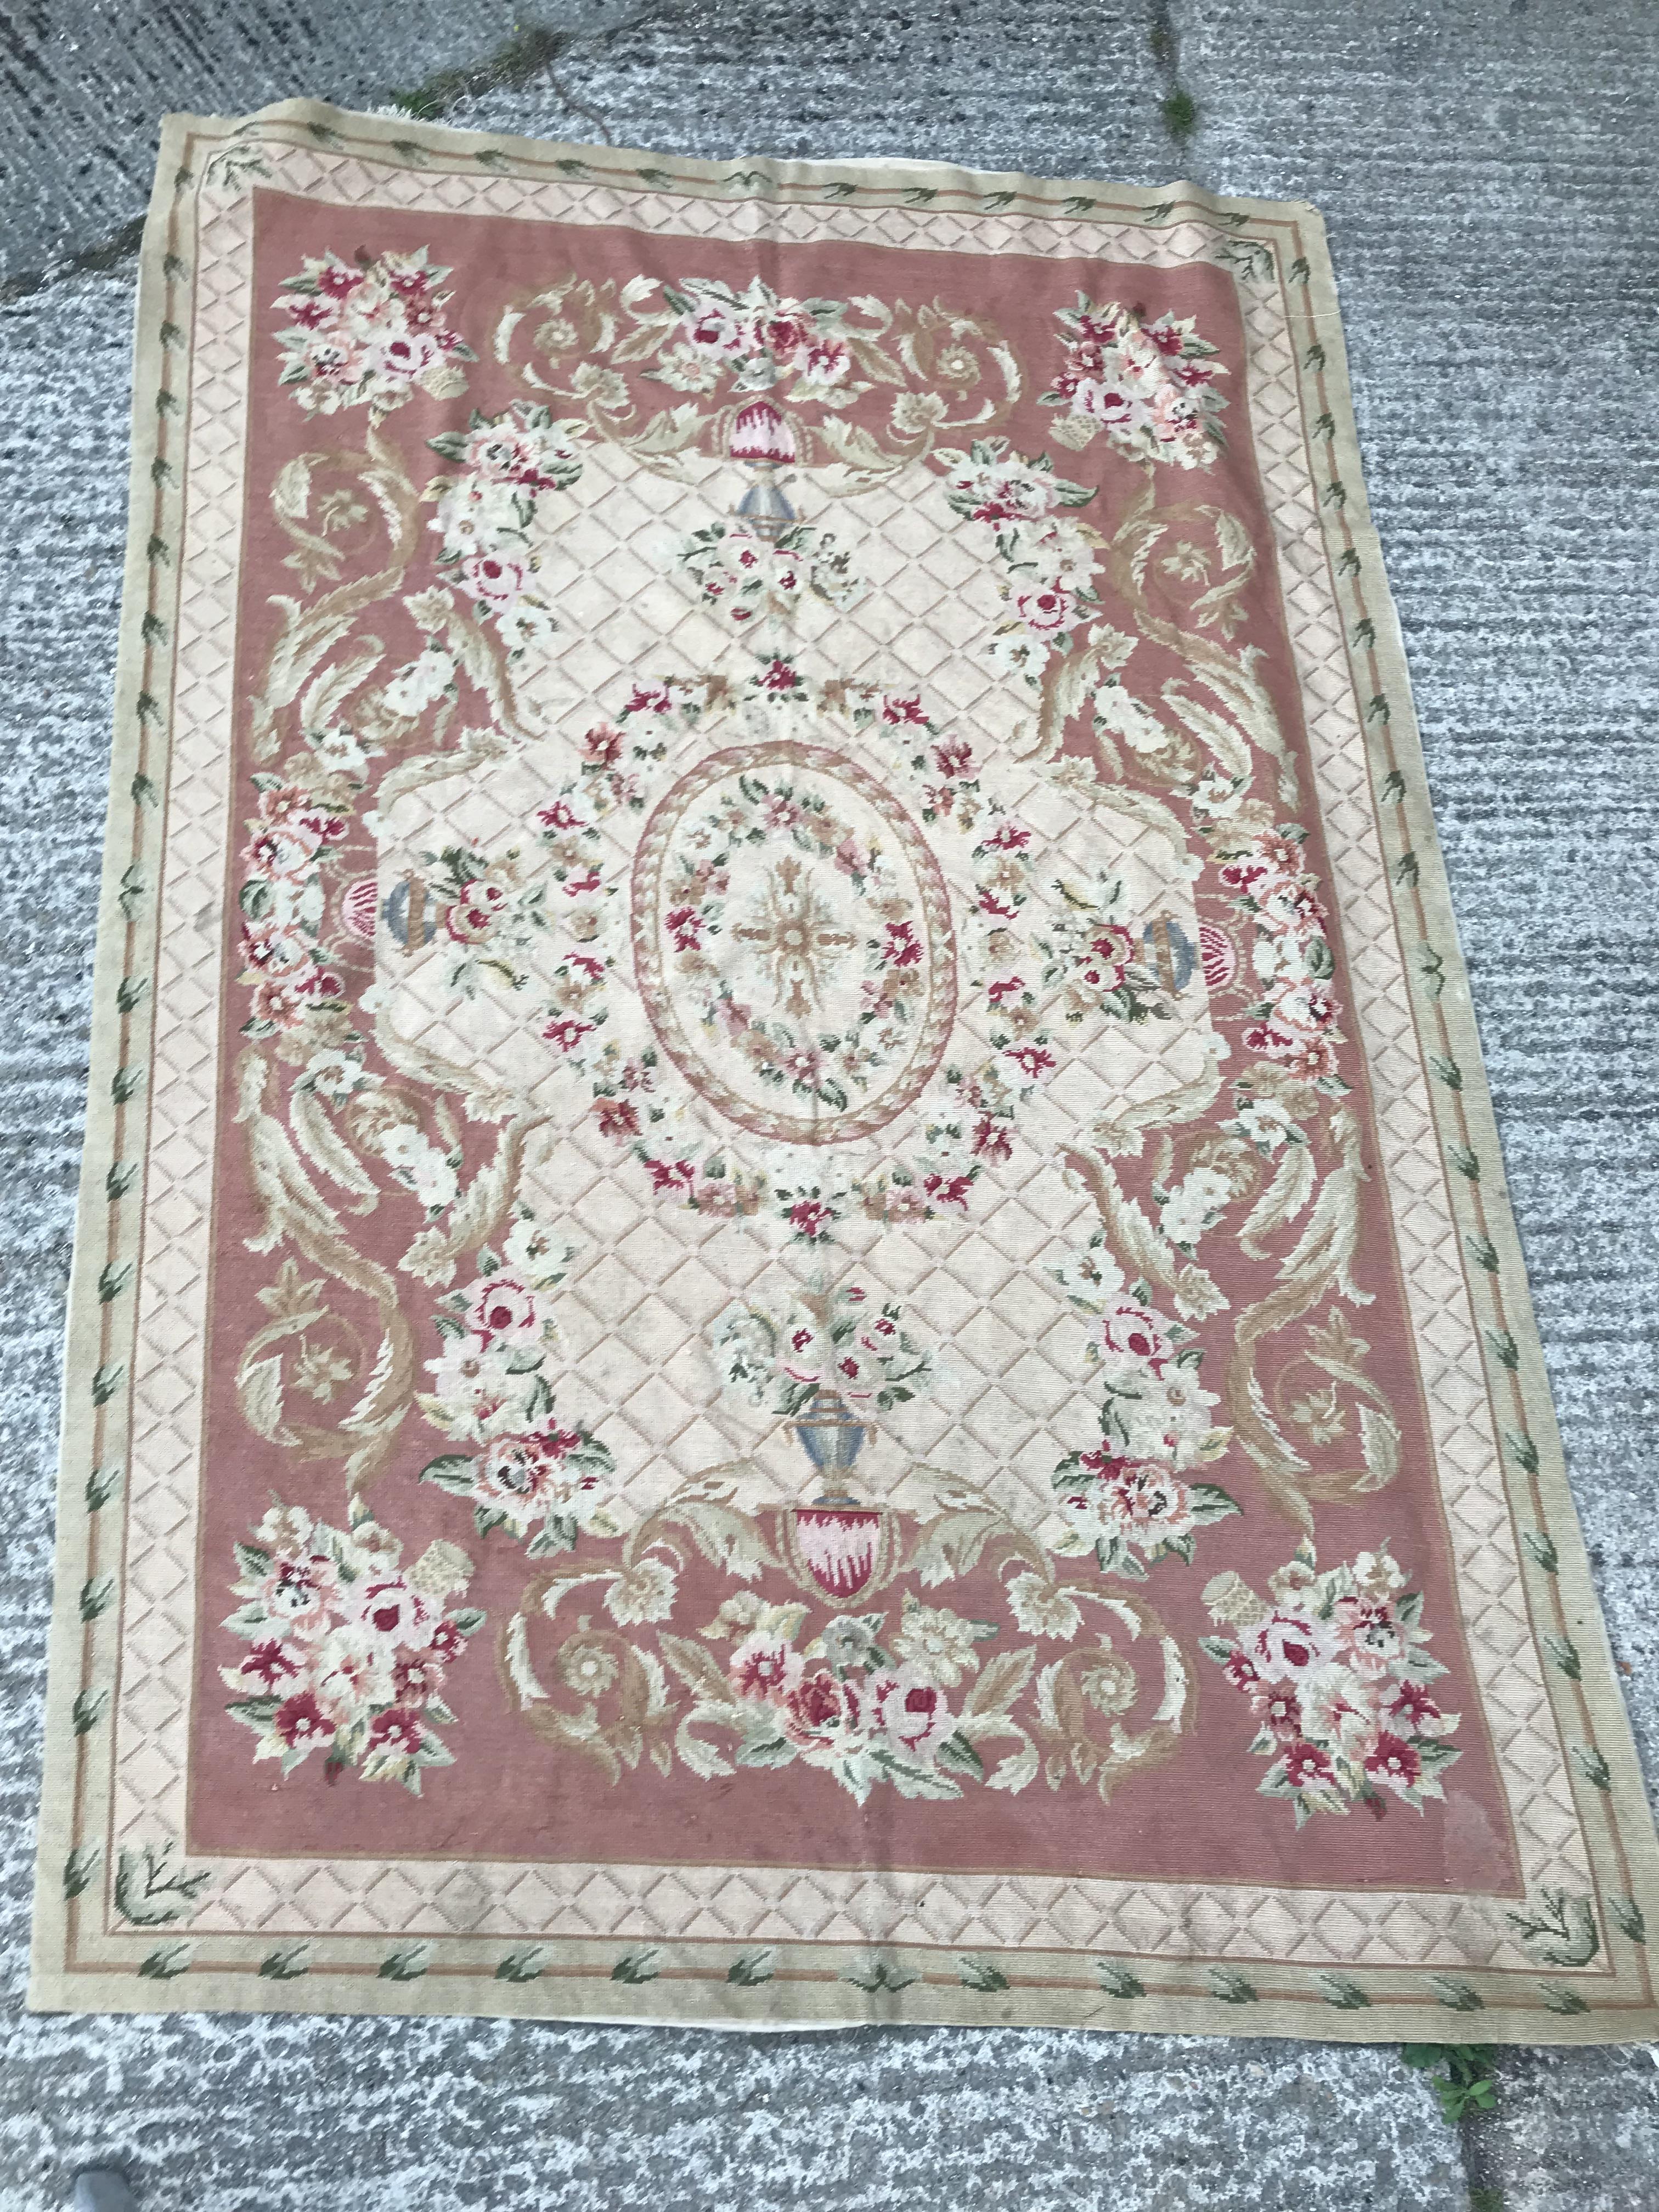 An Aubusson style rug, the central panel set with a floral decorated medallion on pale pink and dark